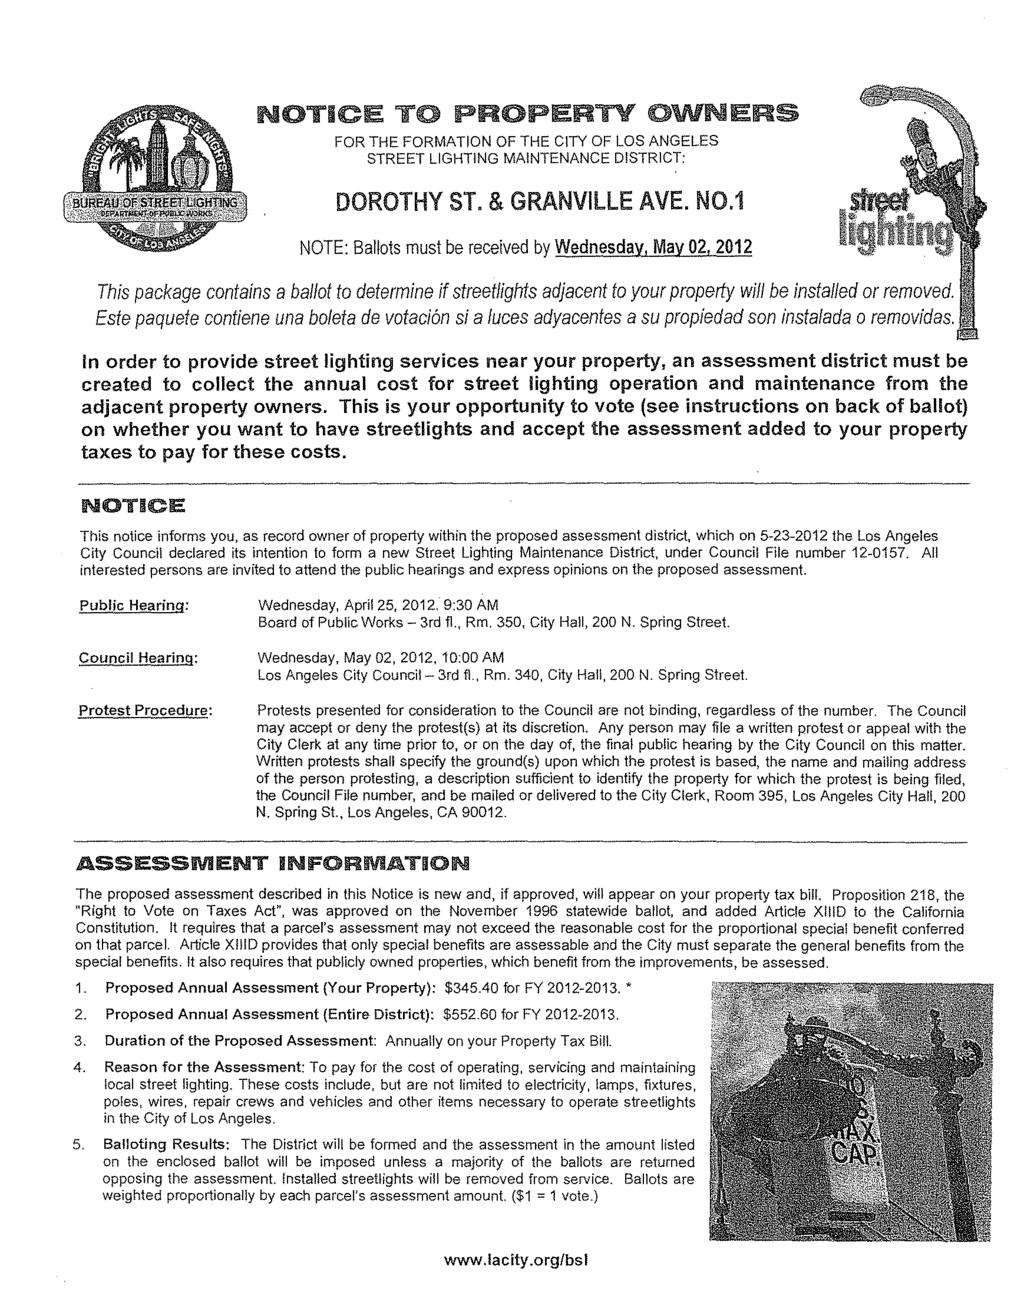 NOTICE TO PROPERTY OWNERS FOR THE FORMATION OF THE CITY OF LOS ANGELES STREET LIGHTING MAINTENANCE DISTRICT: DOROTHY ST. & GRANVILLE AVE. N0.